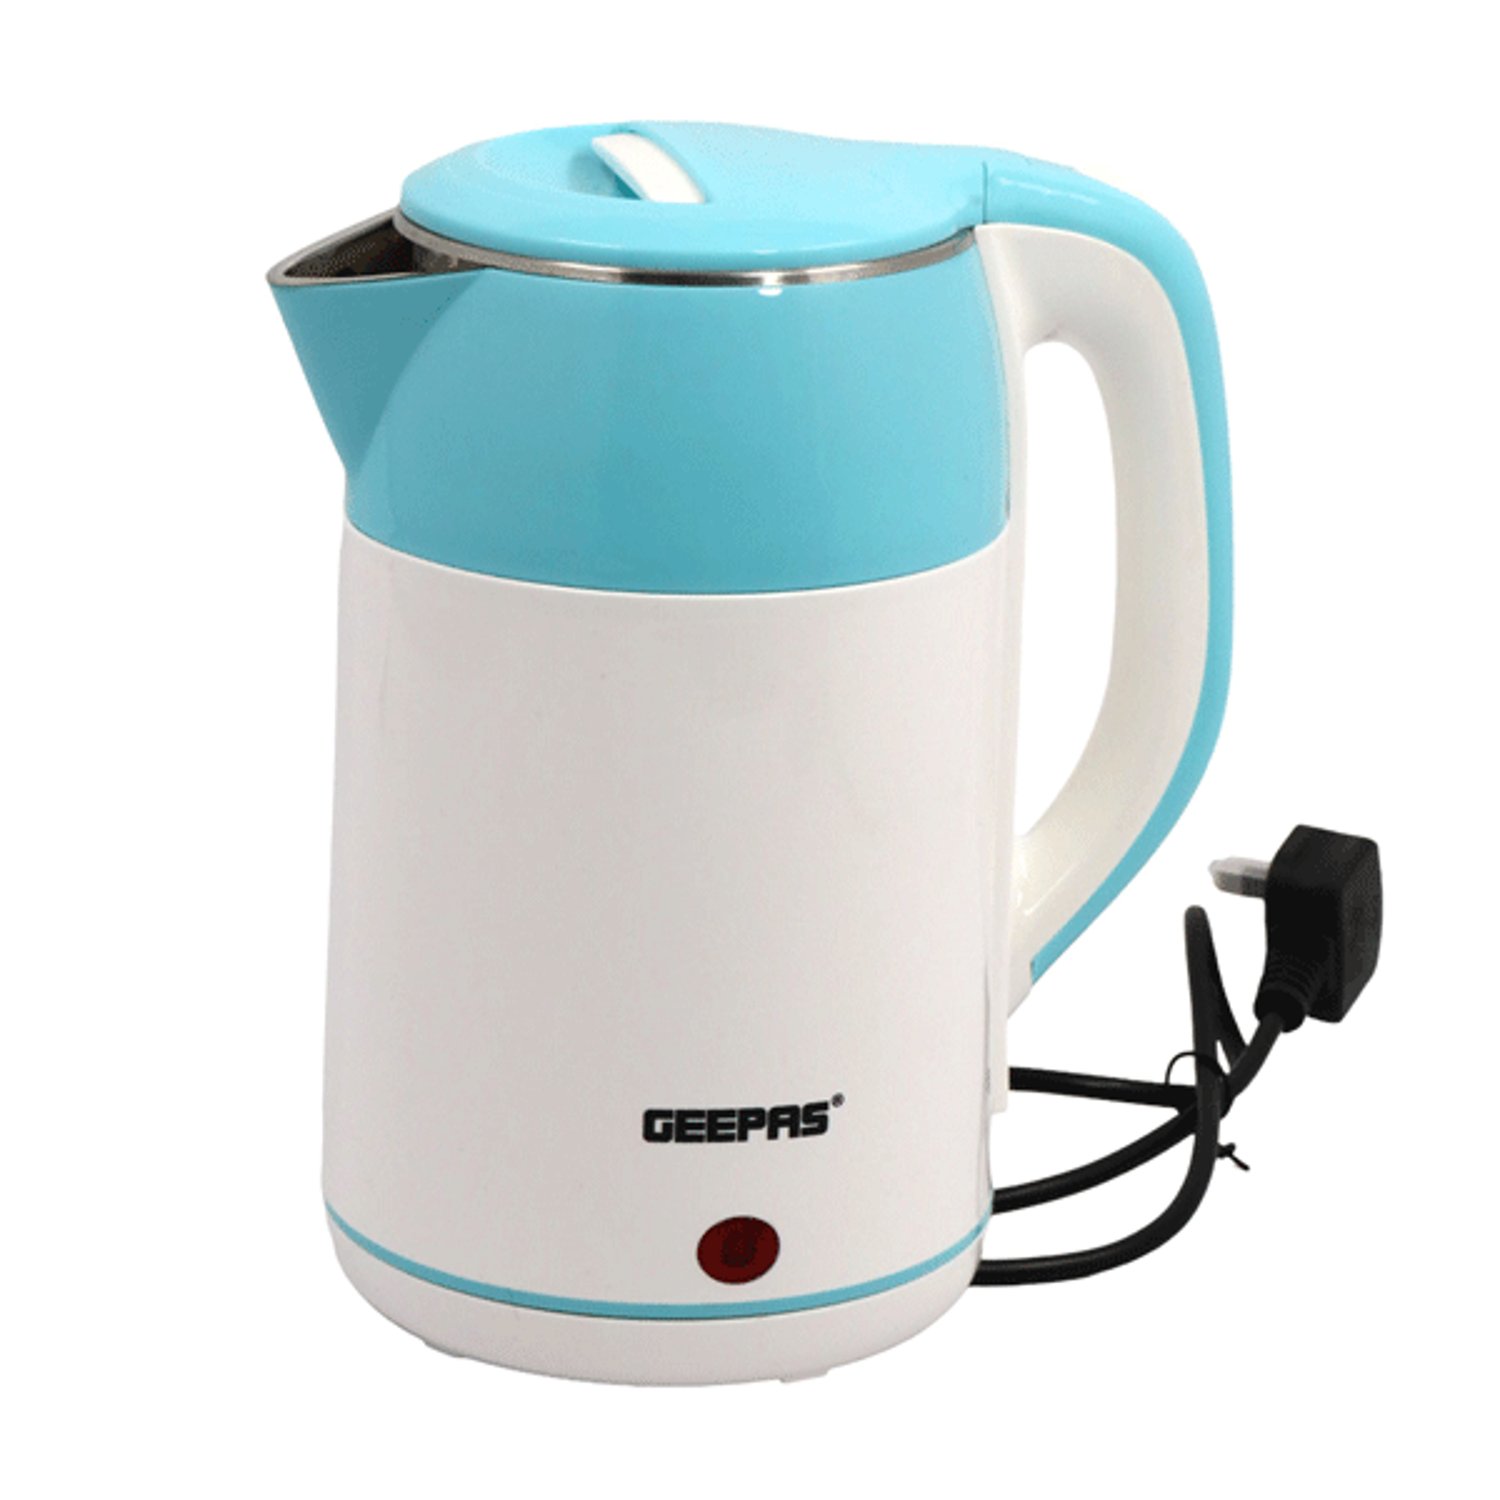 Geepas Double Layer Electric Kettle With Stainless Steel Inner Body 1.8L 1500W - GK6138